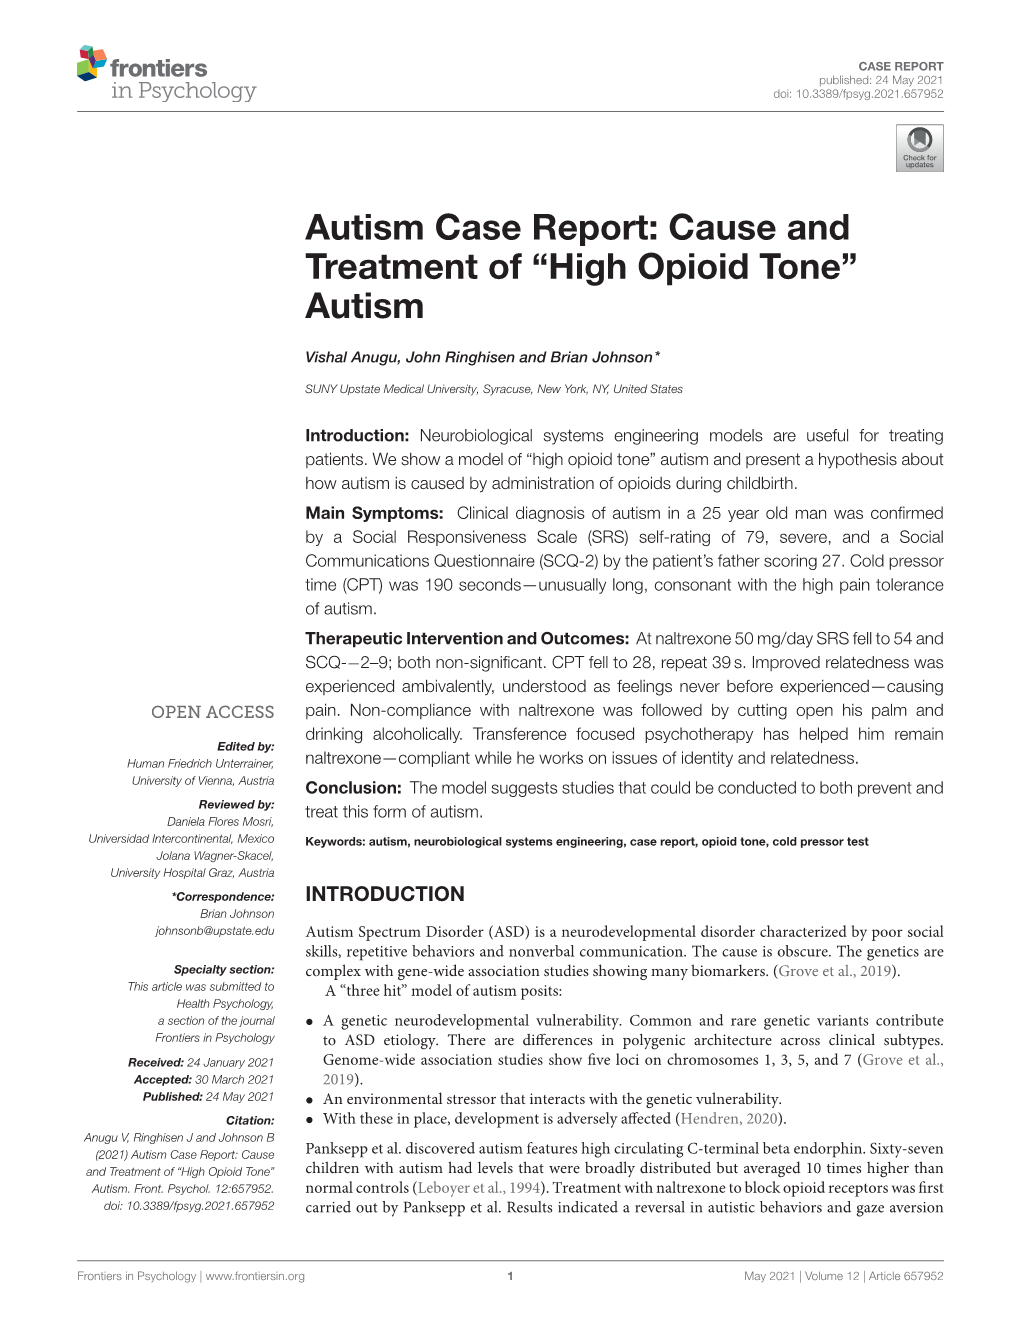 Autism Case Report: Cause and Treatment of “High Opioid Tone” Autism